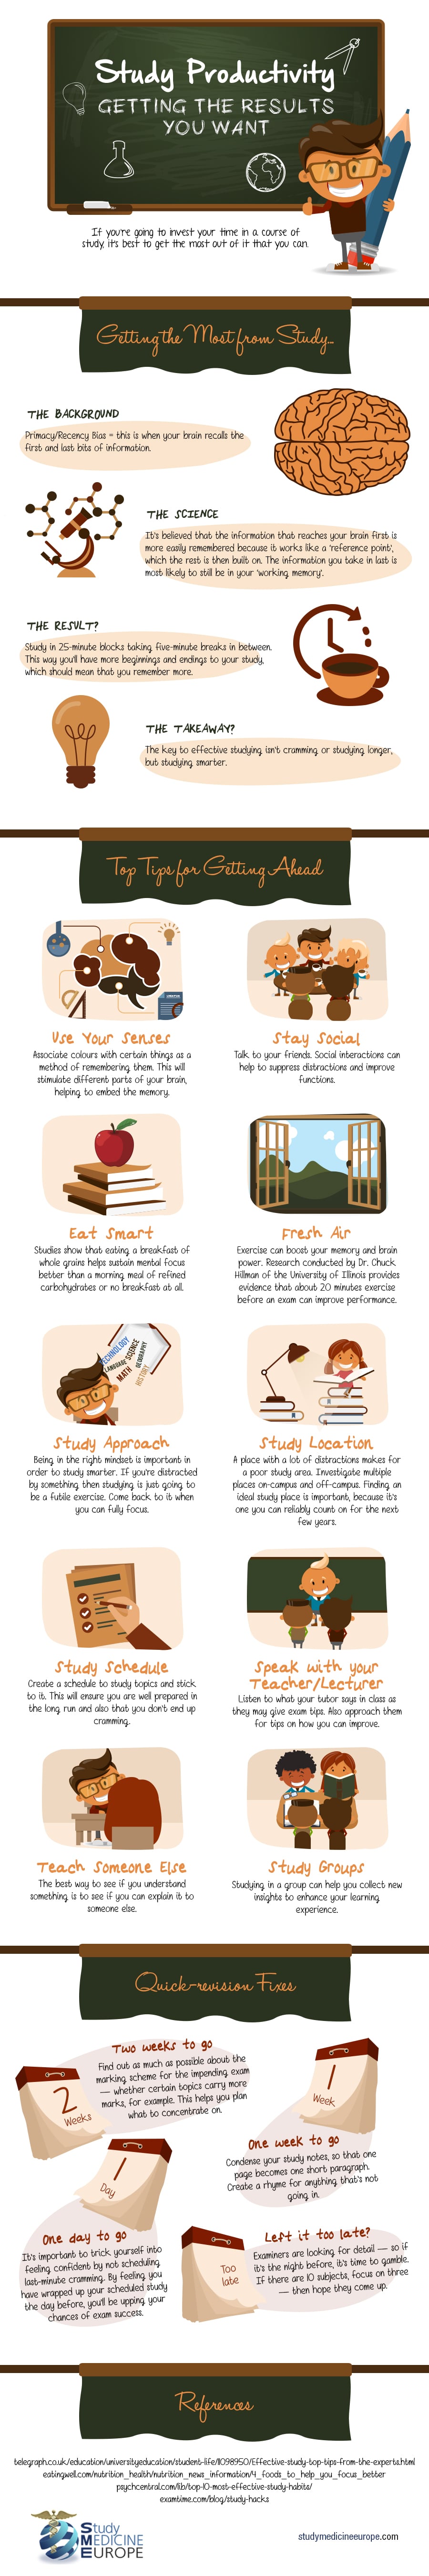 Study-Smart-An-Infographic